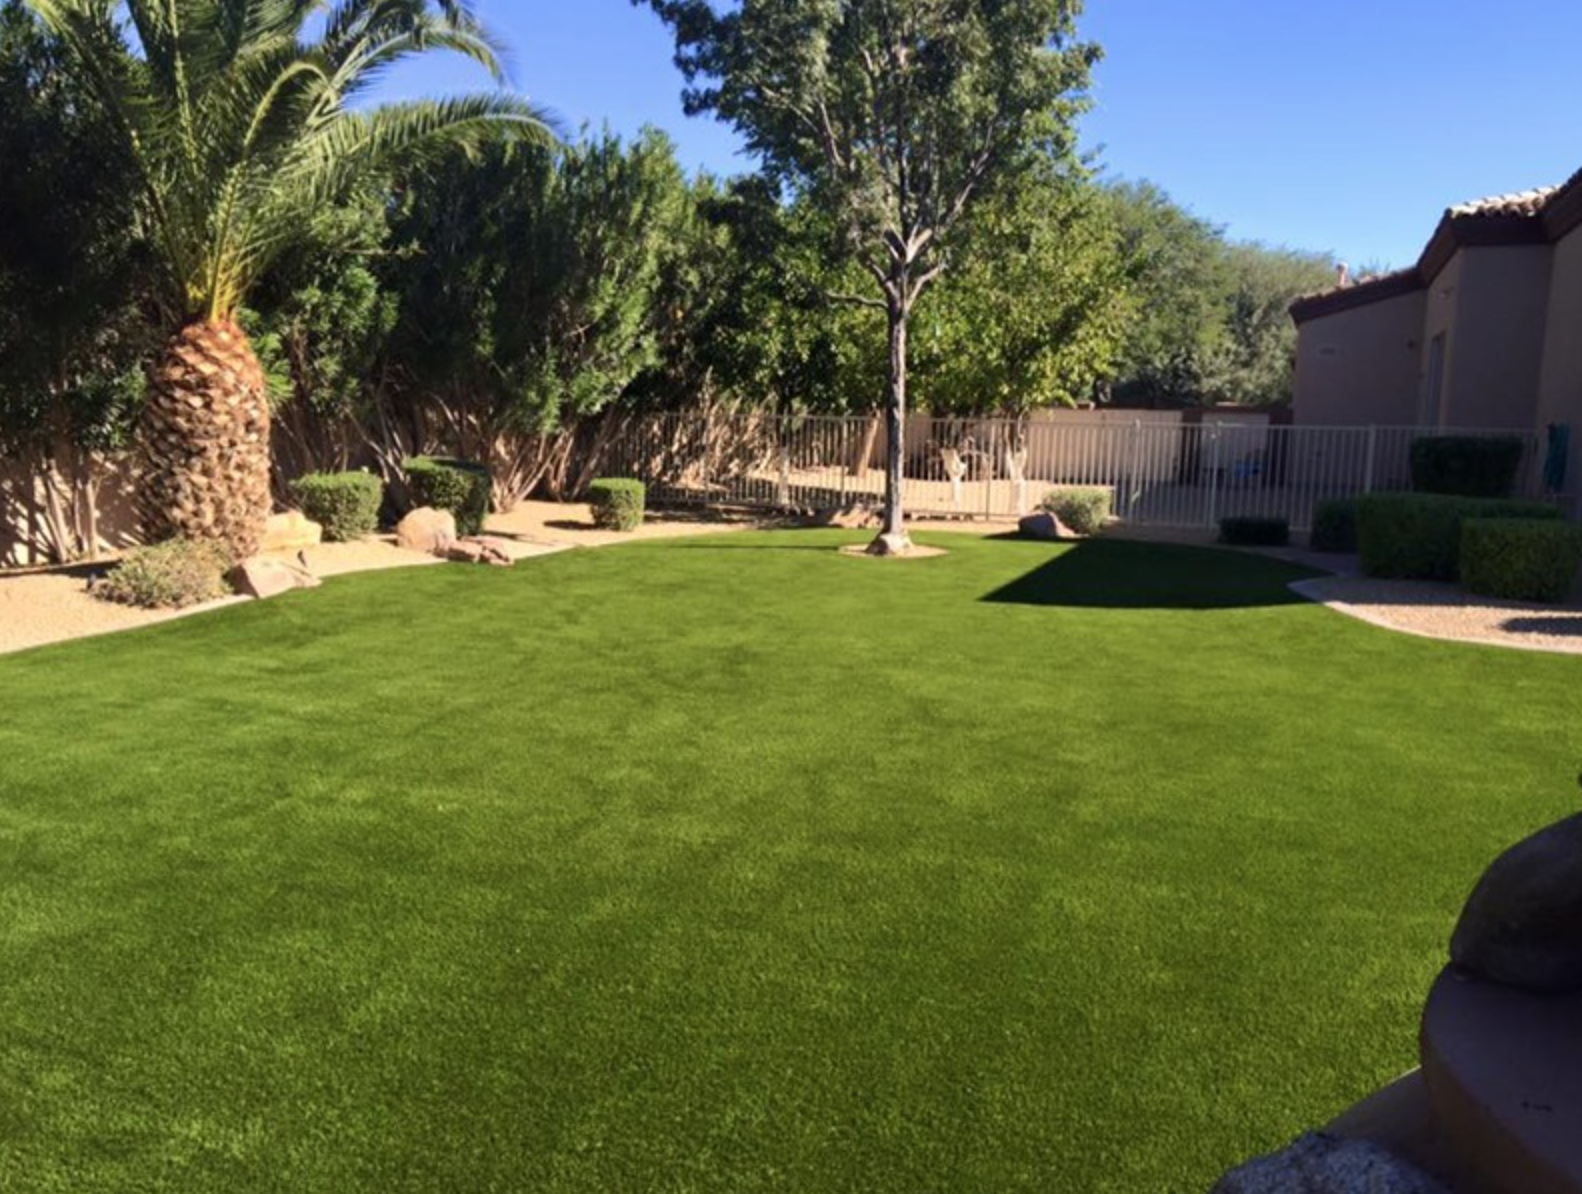  Artificial grass installation in backyard with palm trees and paver walkway 